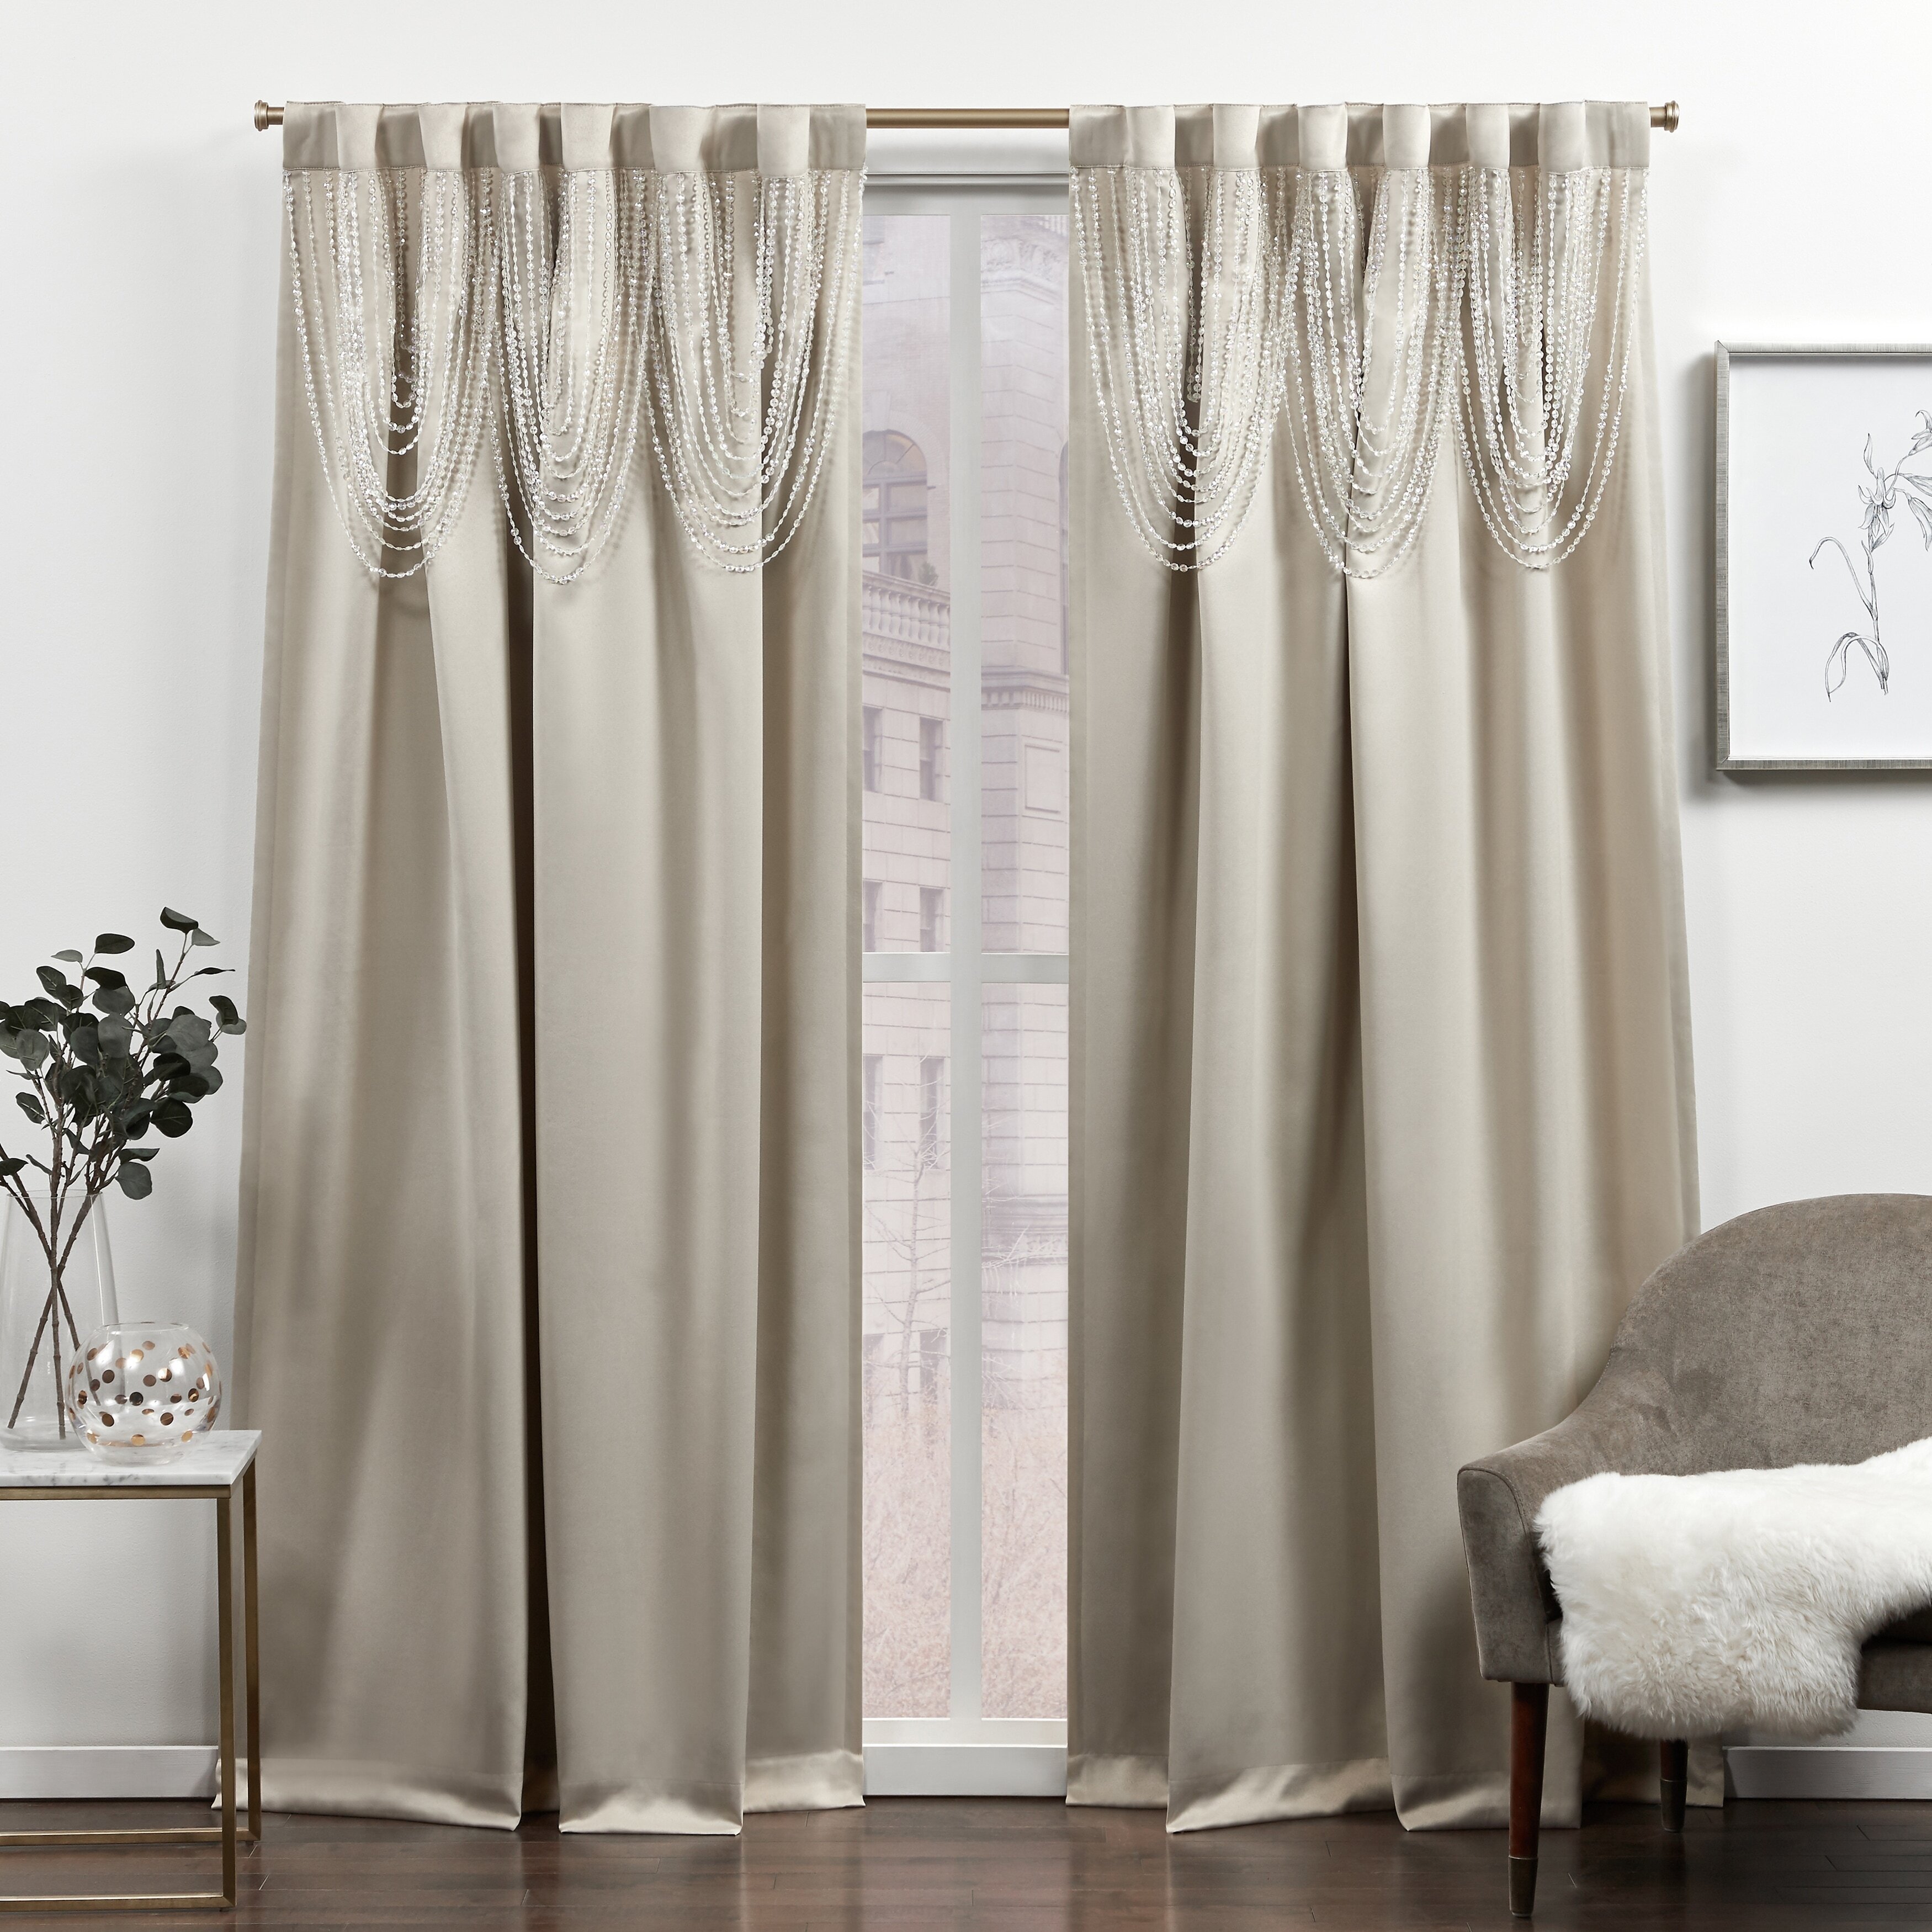 Decorative Curtains With Valance Attached